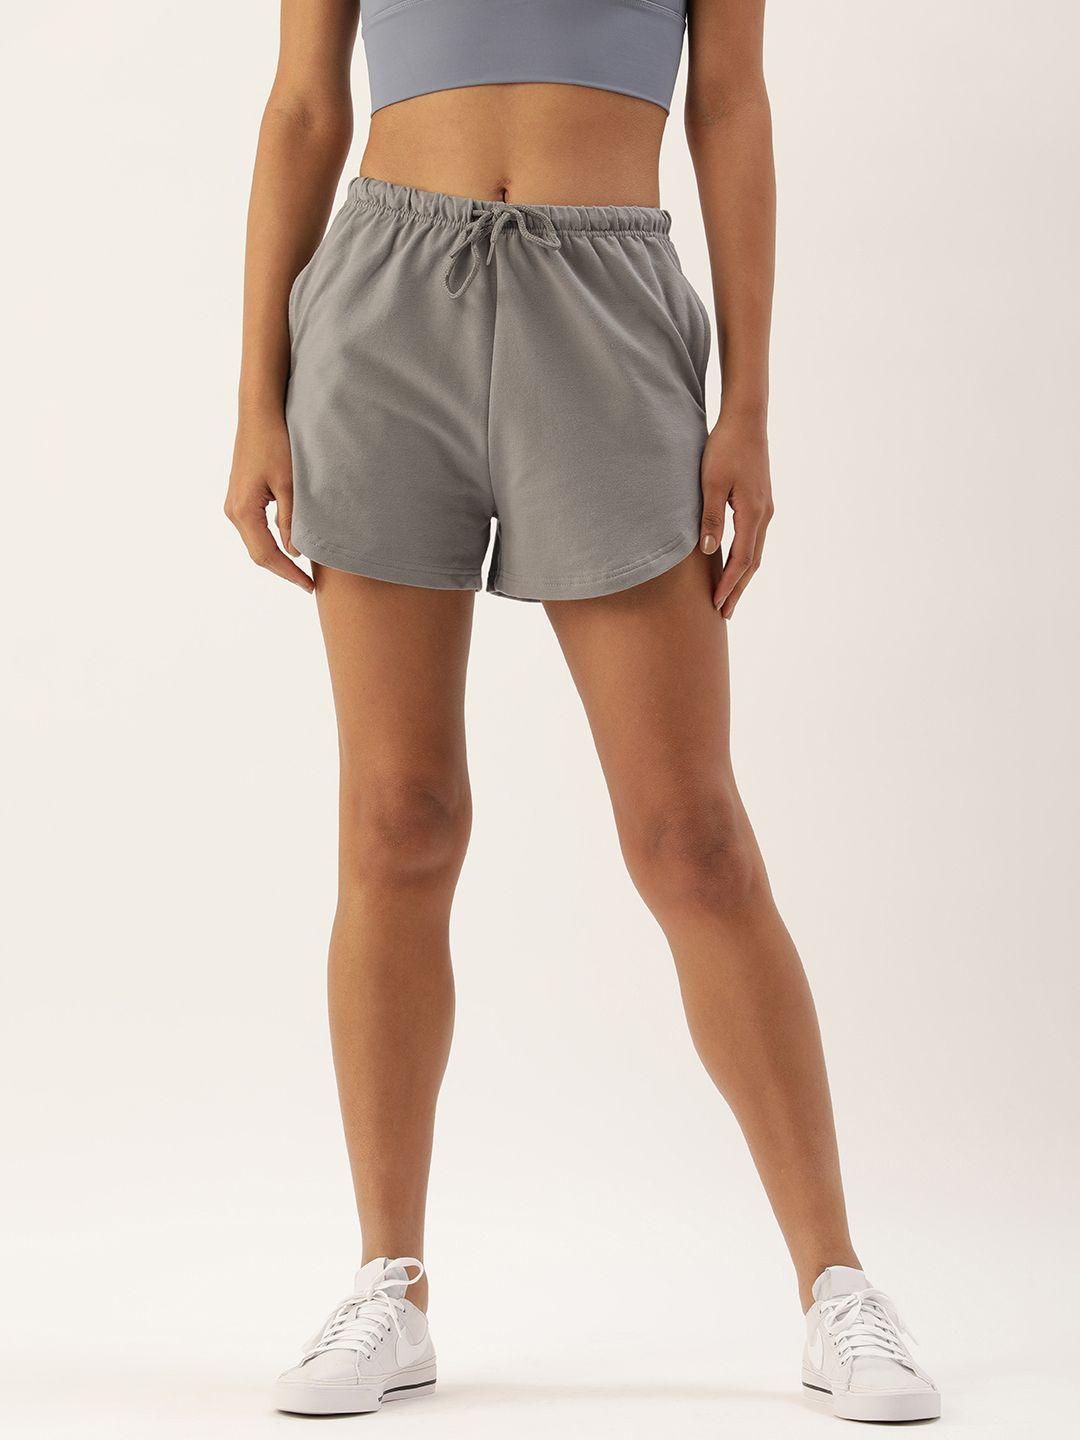 forever 21 women grey solid shorts